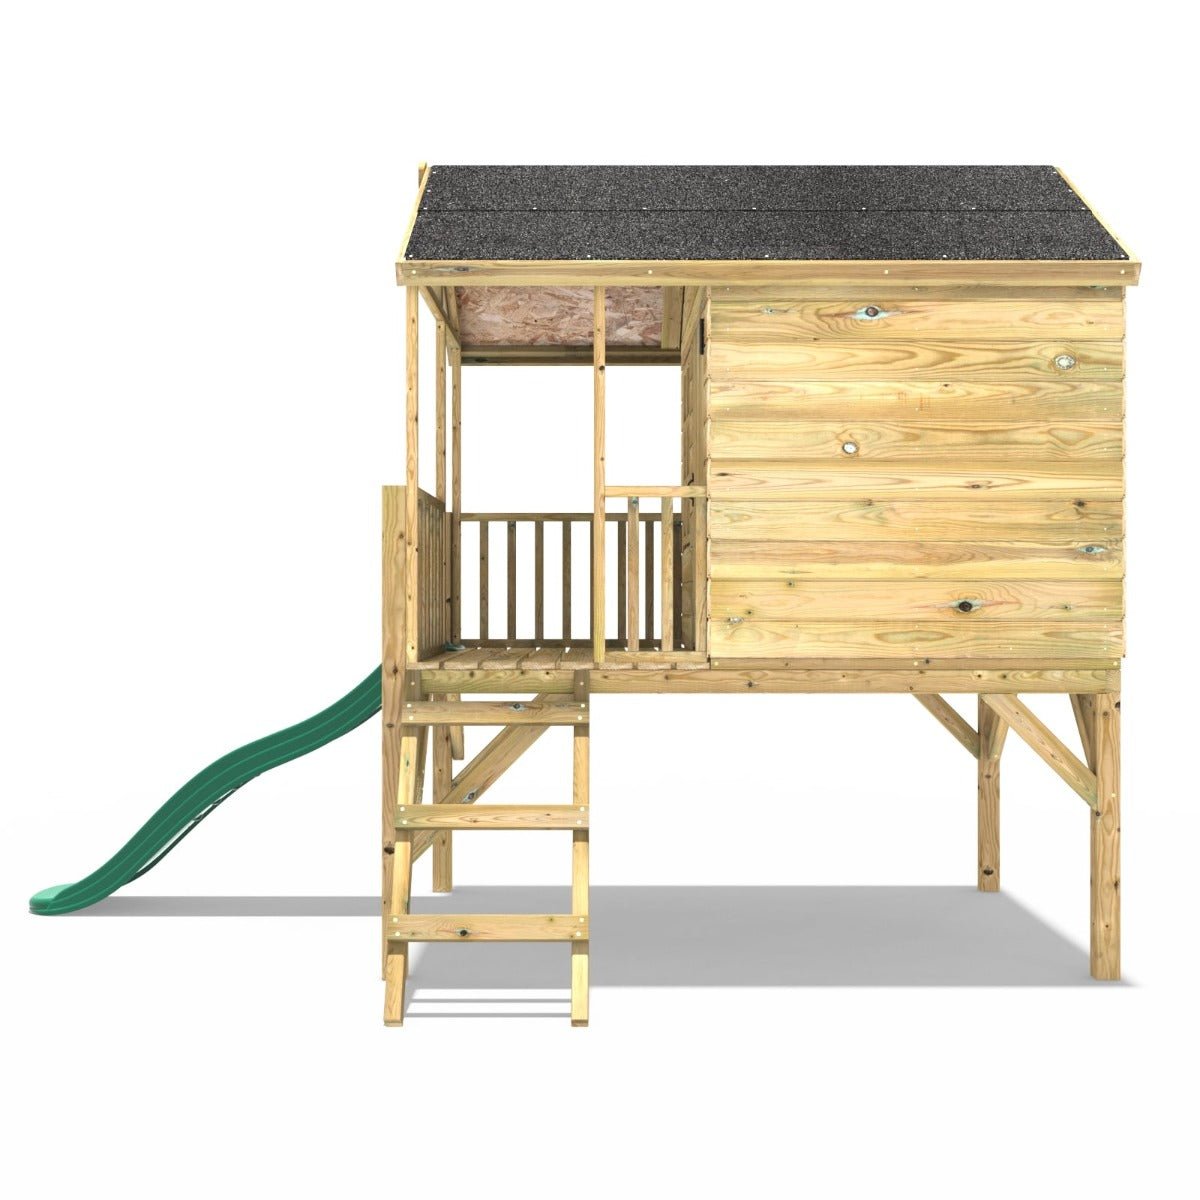 Rebo 5FT x 5FT Childrens Wooden Garden Playhouse on Deck with 6ft Slide - Partridge Green